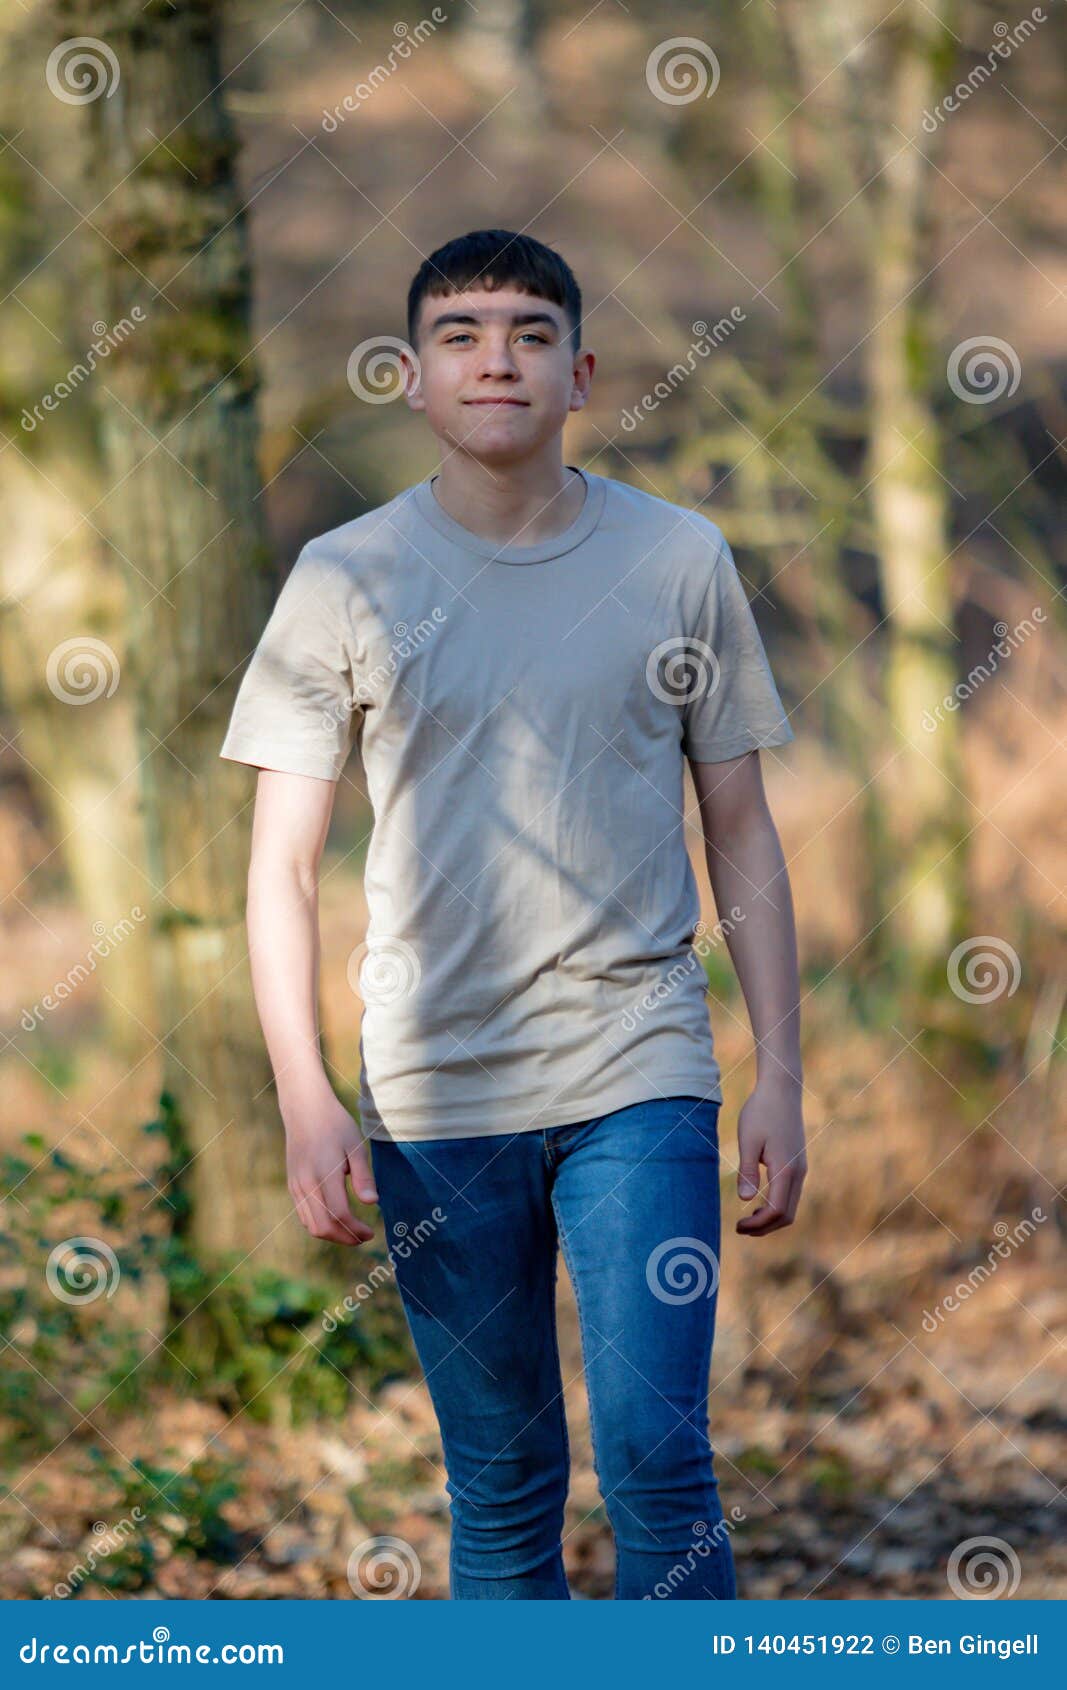 Teenage Boy Outside on a Bright Spring Day Stock Photo - Image of warm ...